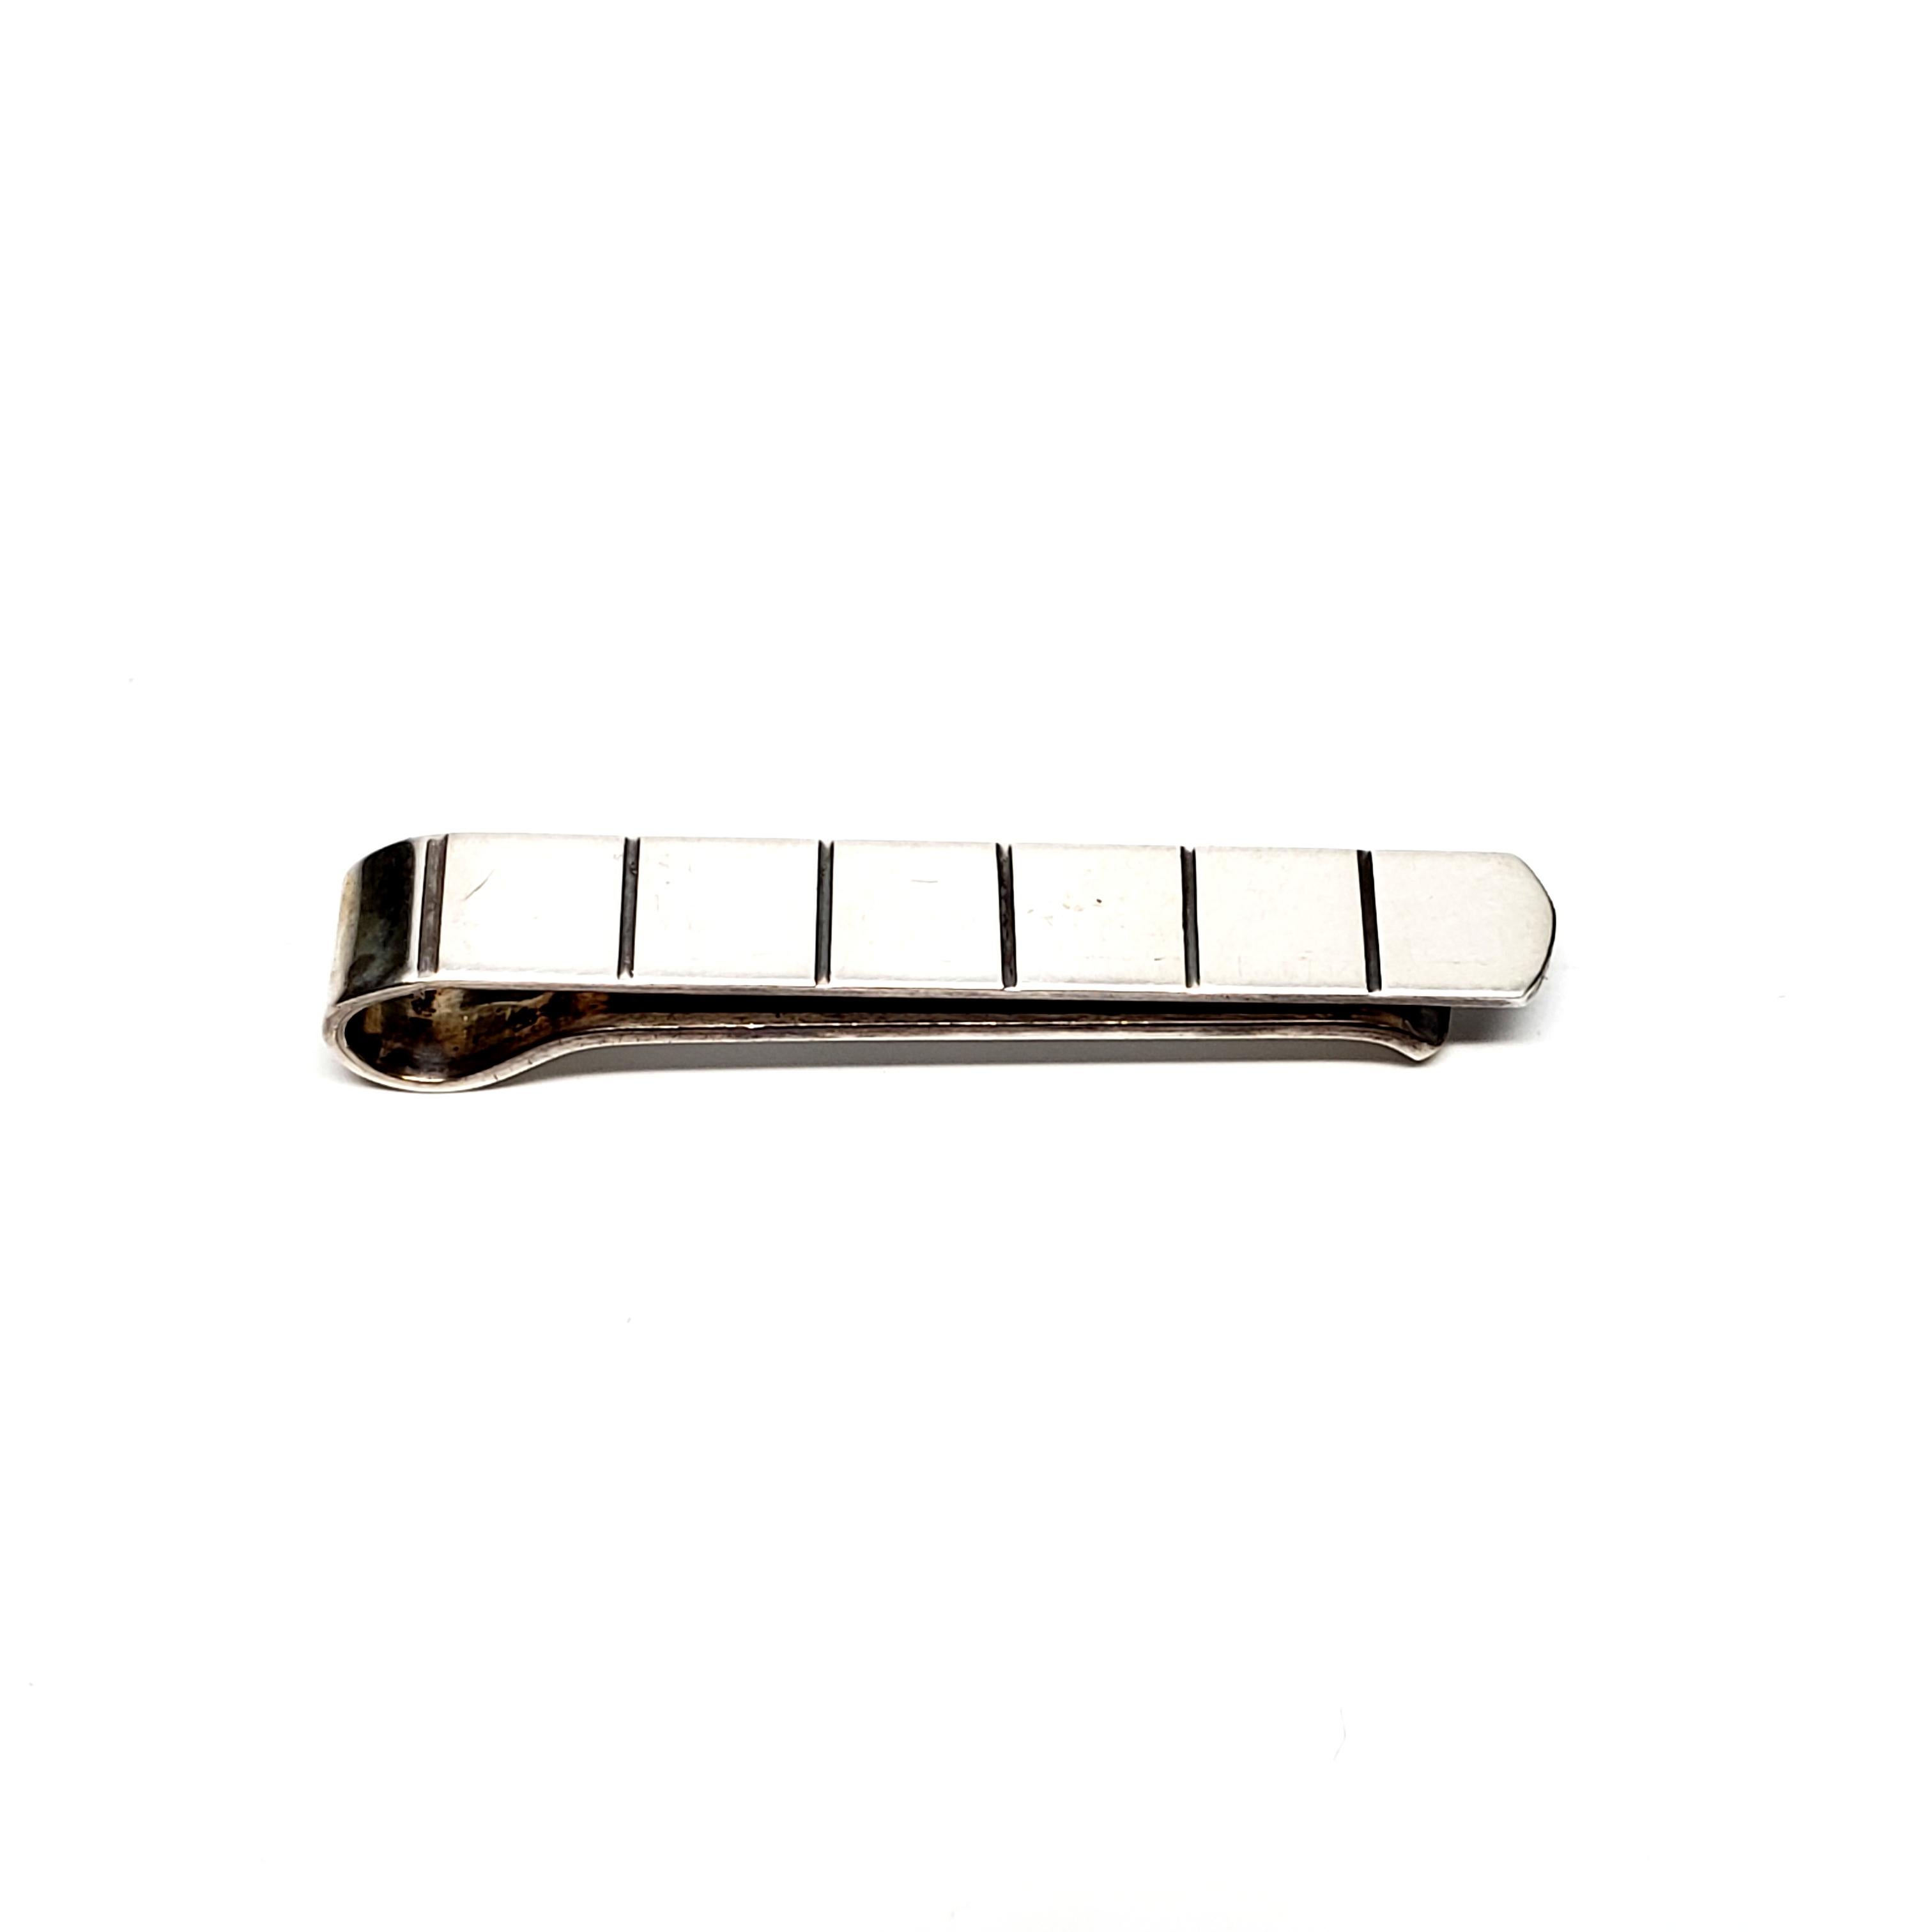 Vintage sterling silver tie clip and cuff links by Aarre & Krogh of Randers, Denmark, 1949-1990.

This set of modernist grooved design is in A&K's distinctive style that is popular with collectors.

Tie clip measures 1 3/4